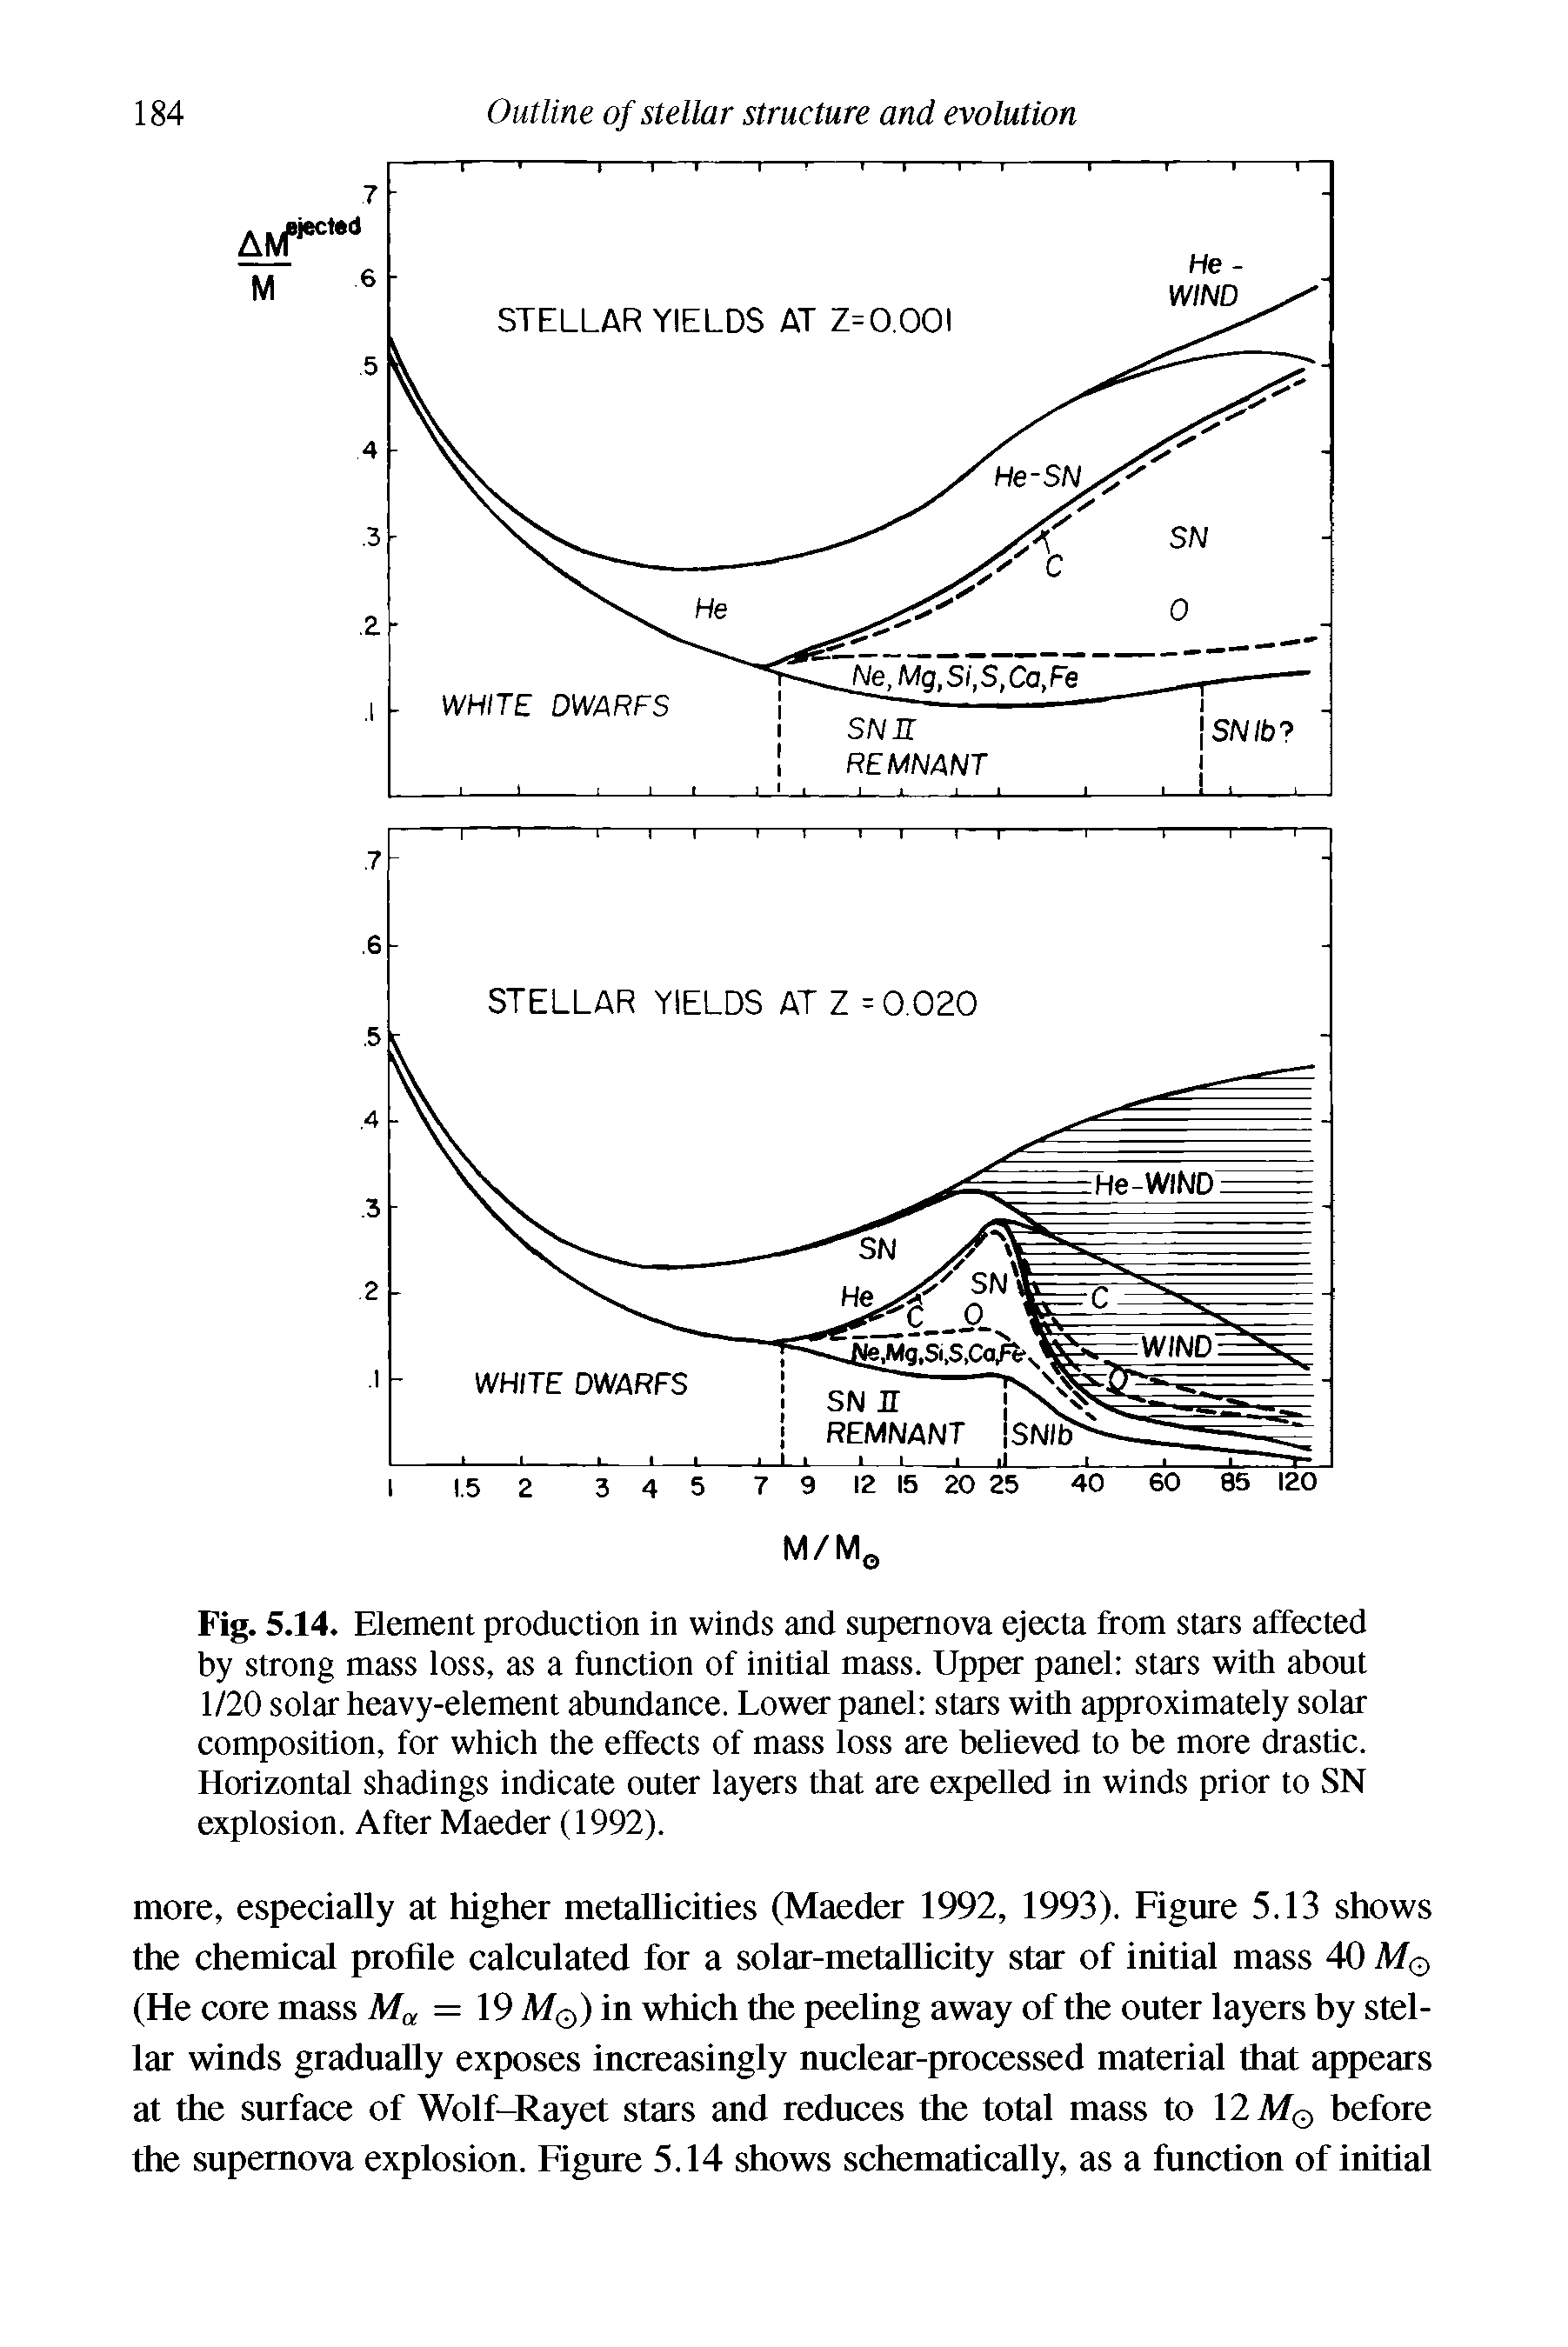 Fig. 5.14. Element production in winds and supernova ejecta from stars affected by strong mass loss, as a function of initial mass. Upper panel stars with about 1/20 solar heavy-element abundance. Lower panel stars with approximately solar composition, for which the effects of mass loss are believed to be more drastic. Horizontal shadings indicate outer layers that are expelled in winds prior to SN explosion. After Maeder (1992).